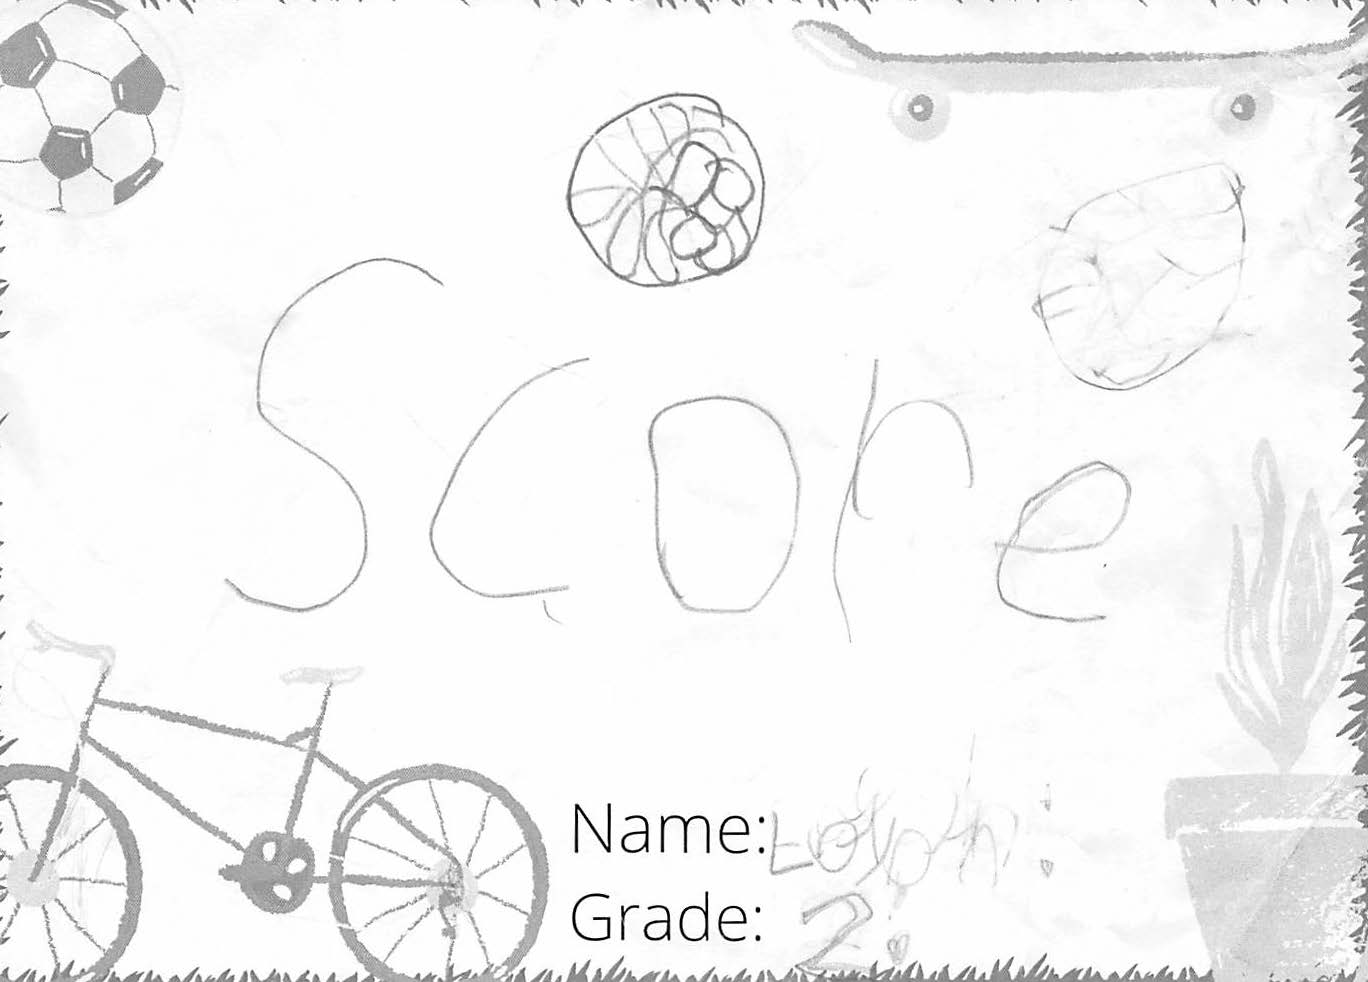 Pencil drawing for the SCORE! logo contest. The drawing includes the word: SCORE.